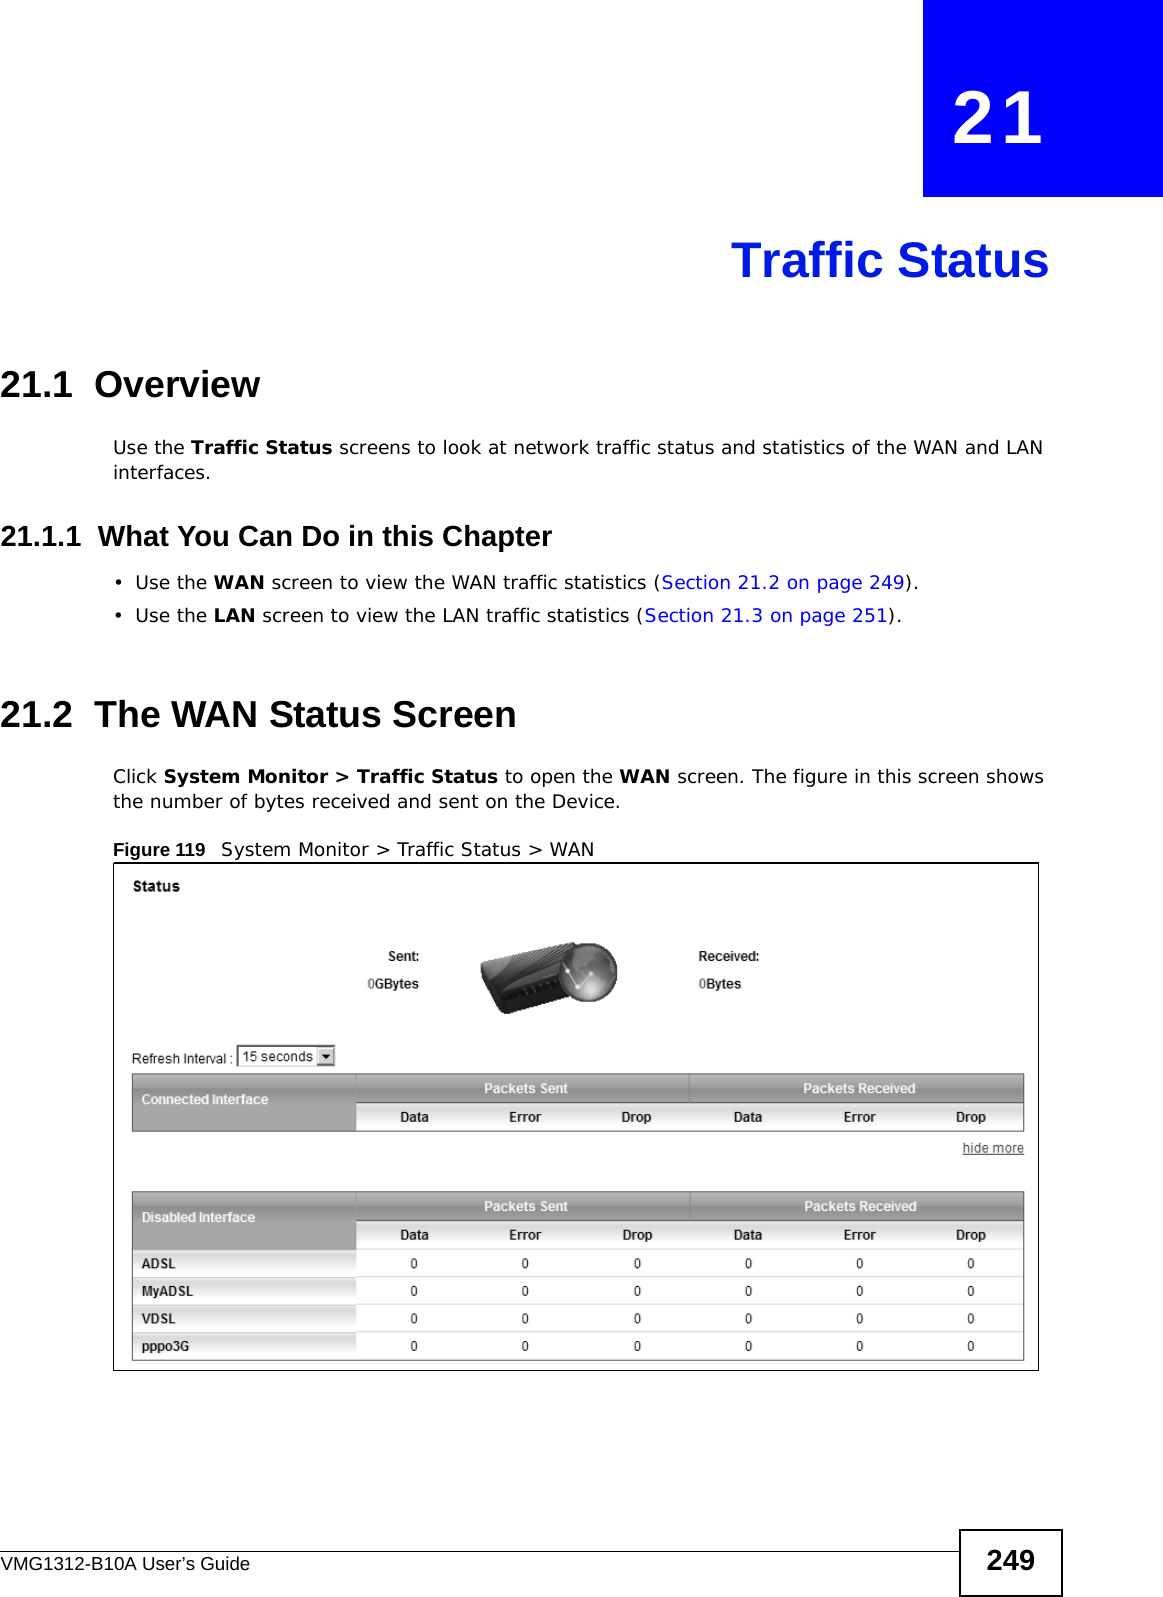 VMG1312-B10A User’s Guide 249CHAPTER   21Traffic Status21.1  OverviewUse the Traffic Status screens to look at network traffic status and statistics of the WAN and LAN interfaces. 21.1.1  What You Can Do in this Chapter•Use the WAN screen to view the WAN traffic statistics (Section 21.2 on page 249).•Use the LAN screen to view the LAN traffic statistics (Section 21.3 on page 251).21.2  The WAN Status Screen Click System Monitor &gt; Traffic Status to open the WAN screen. The figure in this screen shows the number of bytes received and sent on the Device.Figure 119   System Monitor &gt; Traffic Status &gt; WAN